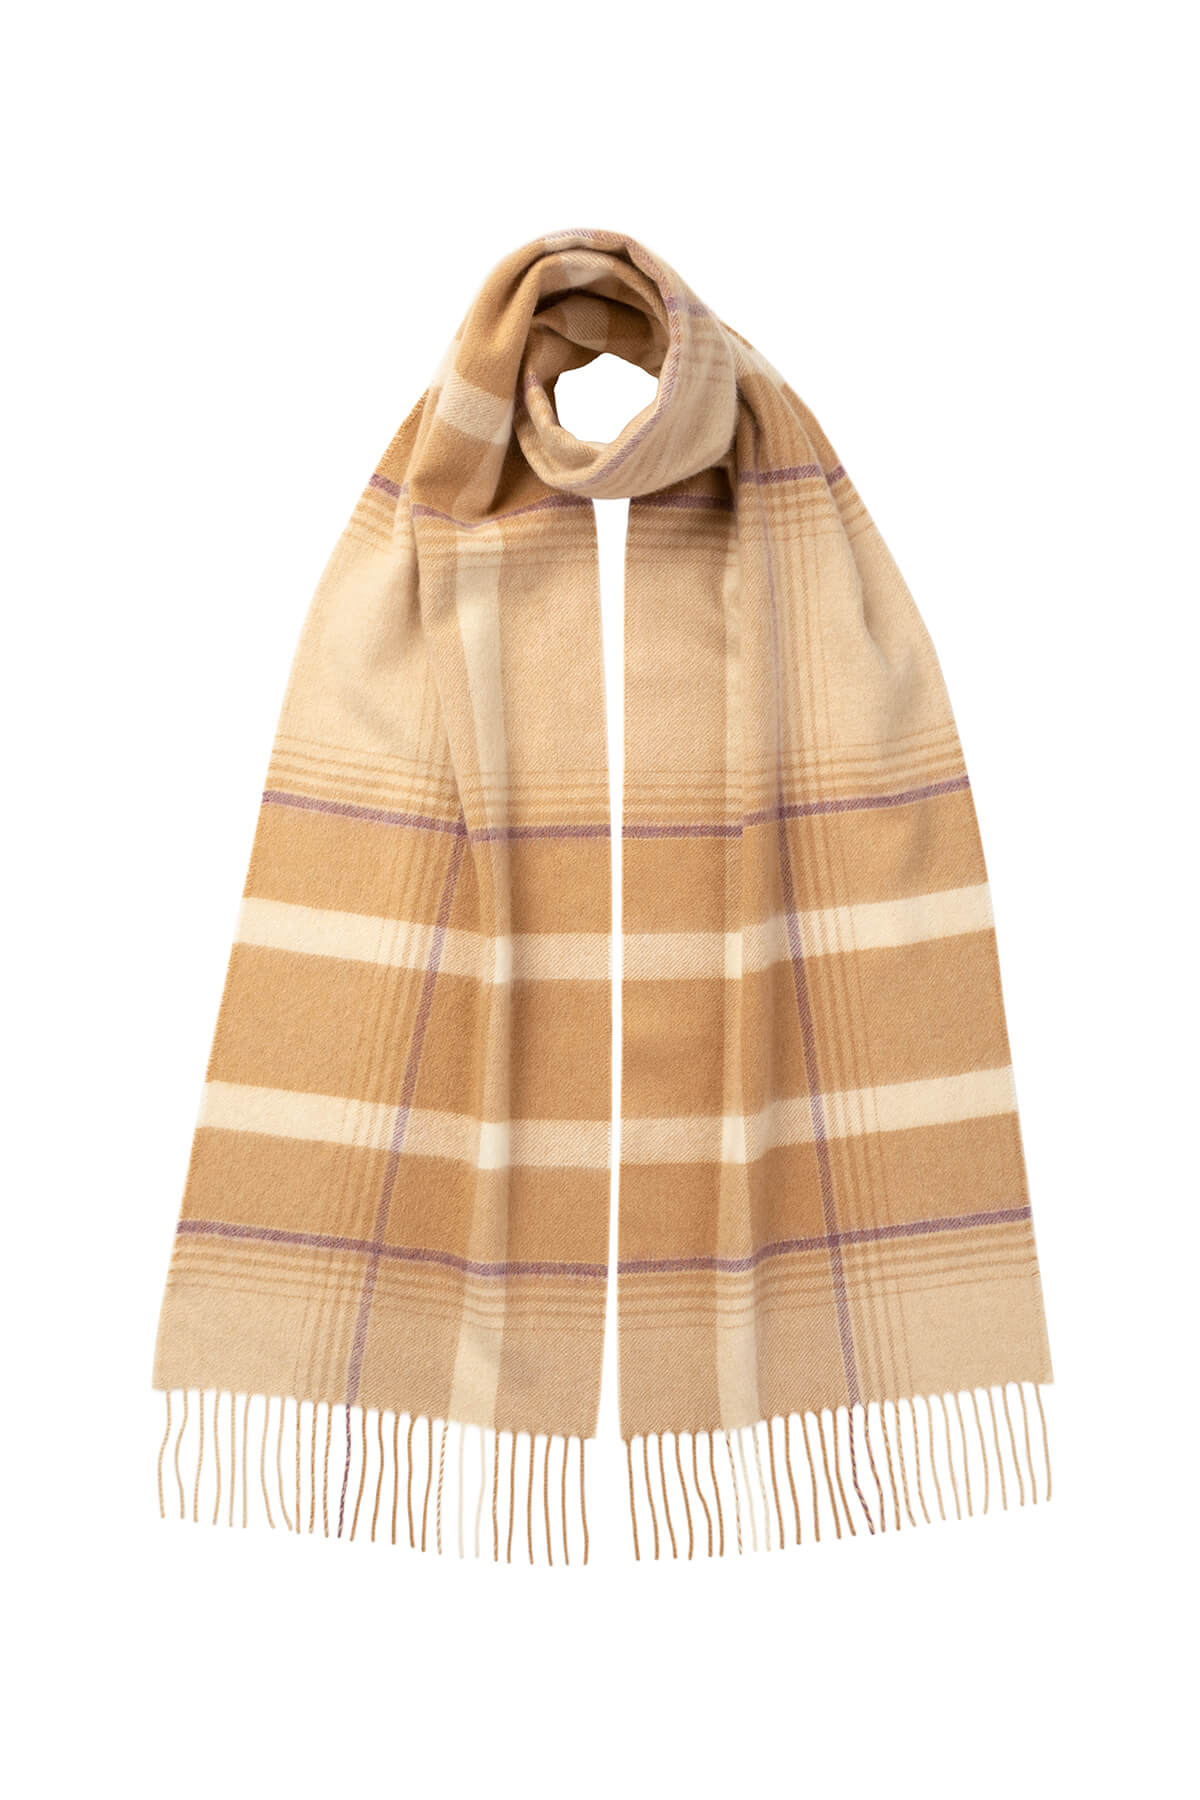 Johnstons of Elgin Asymmetric Check Cashmere Scarf in Camel on a white background WA000016RU7317ONE